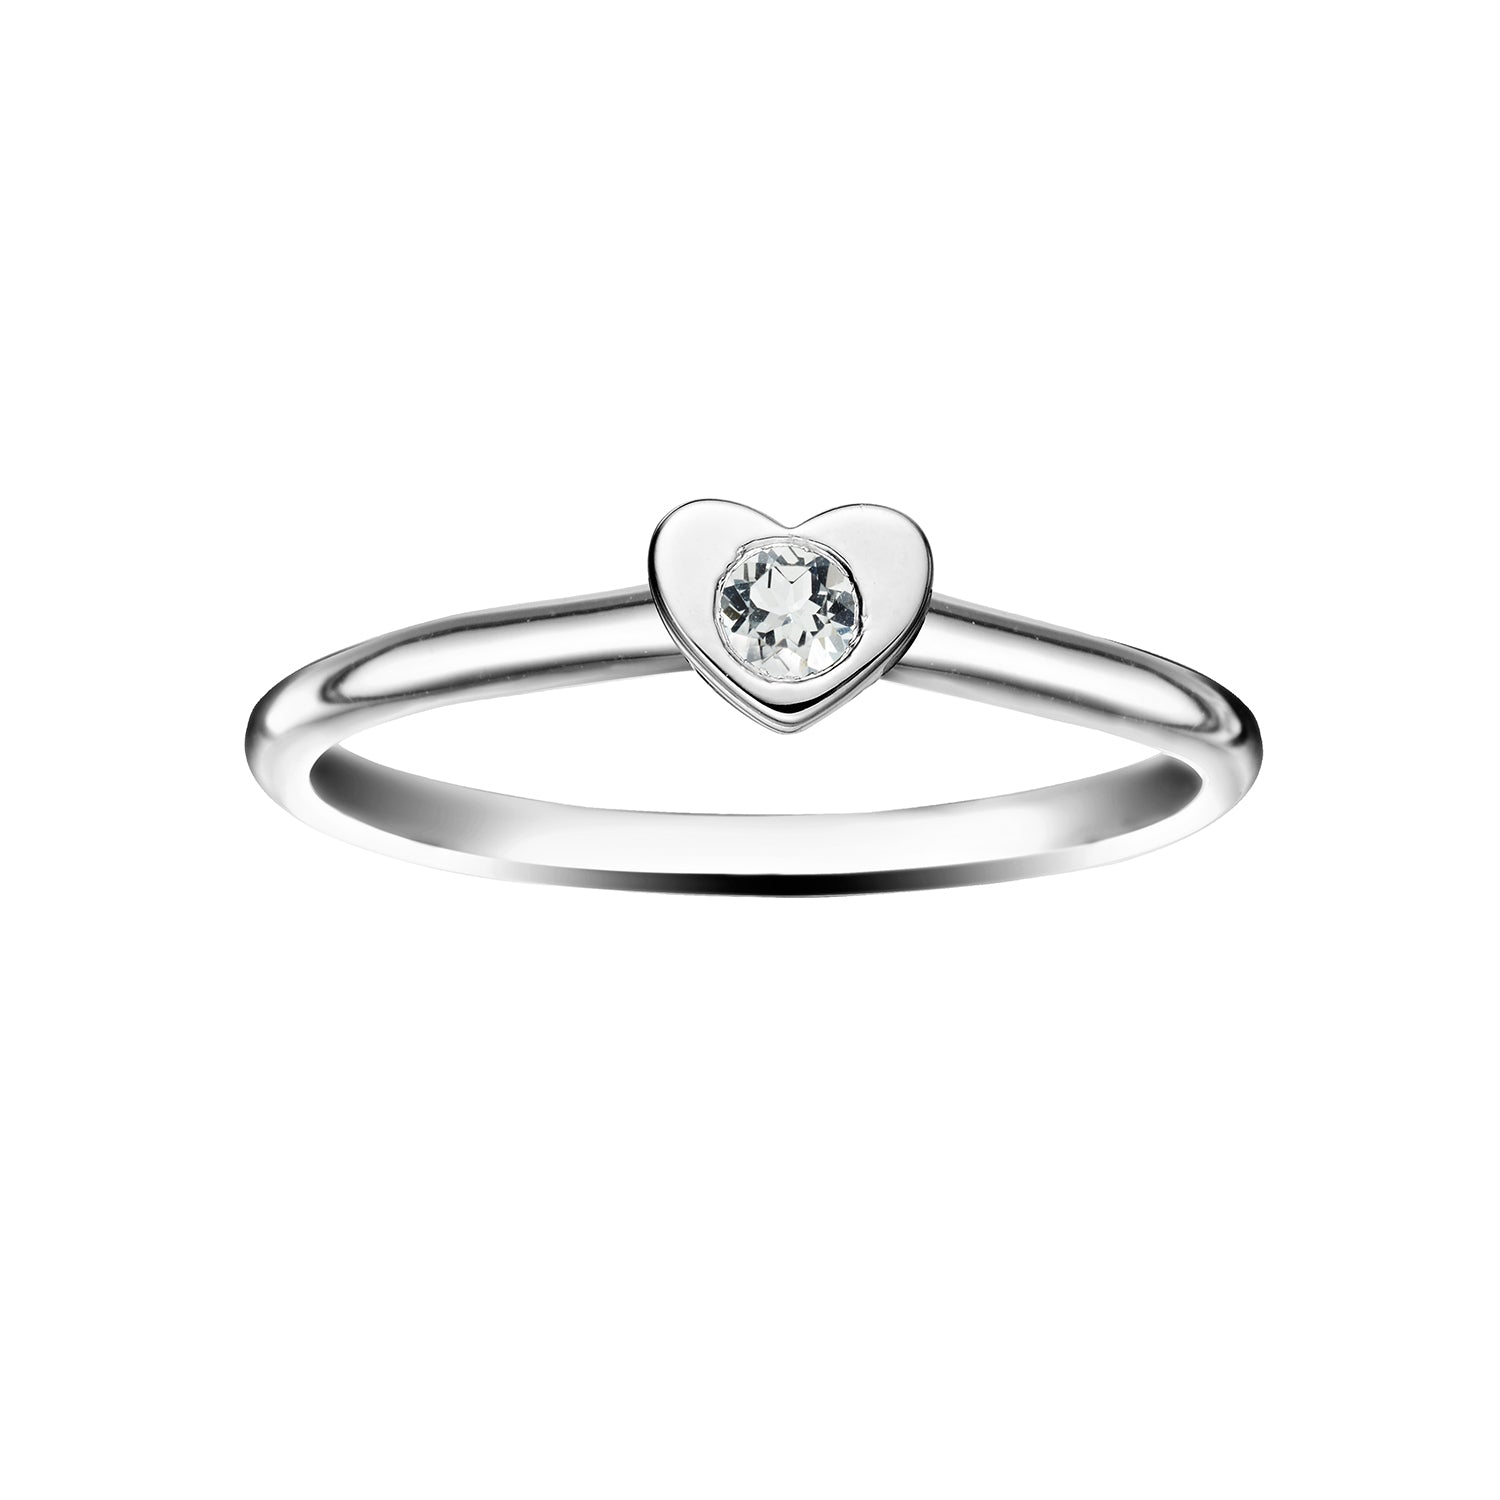 Polished Silver Heart Stacking Birthstone Rings - April / White Topaz